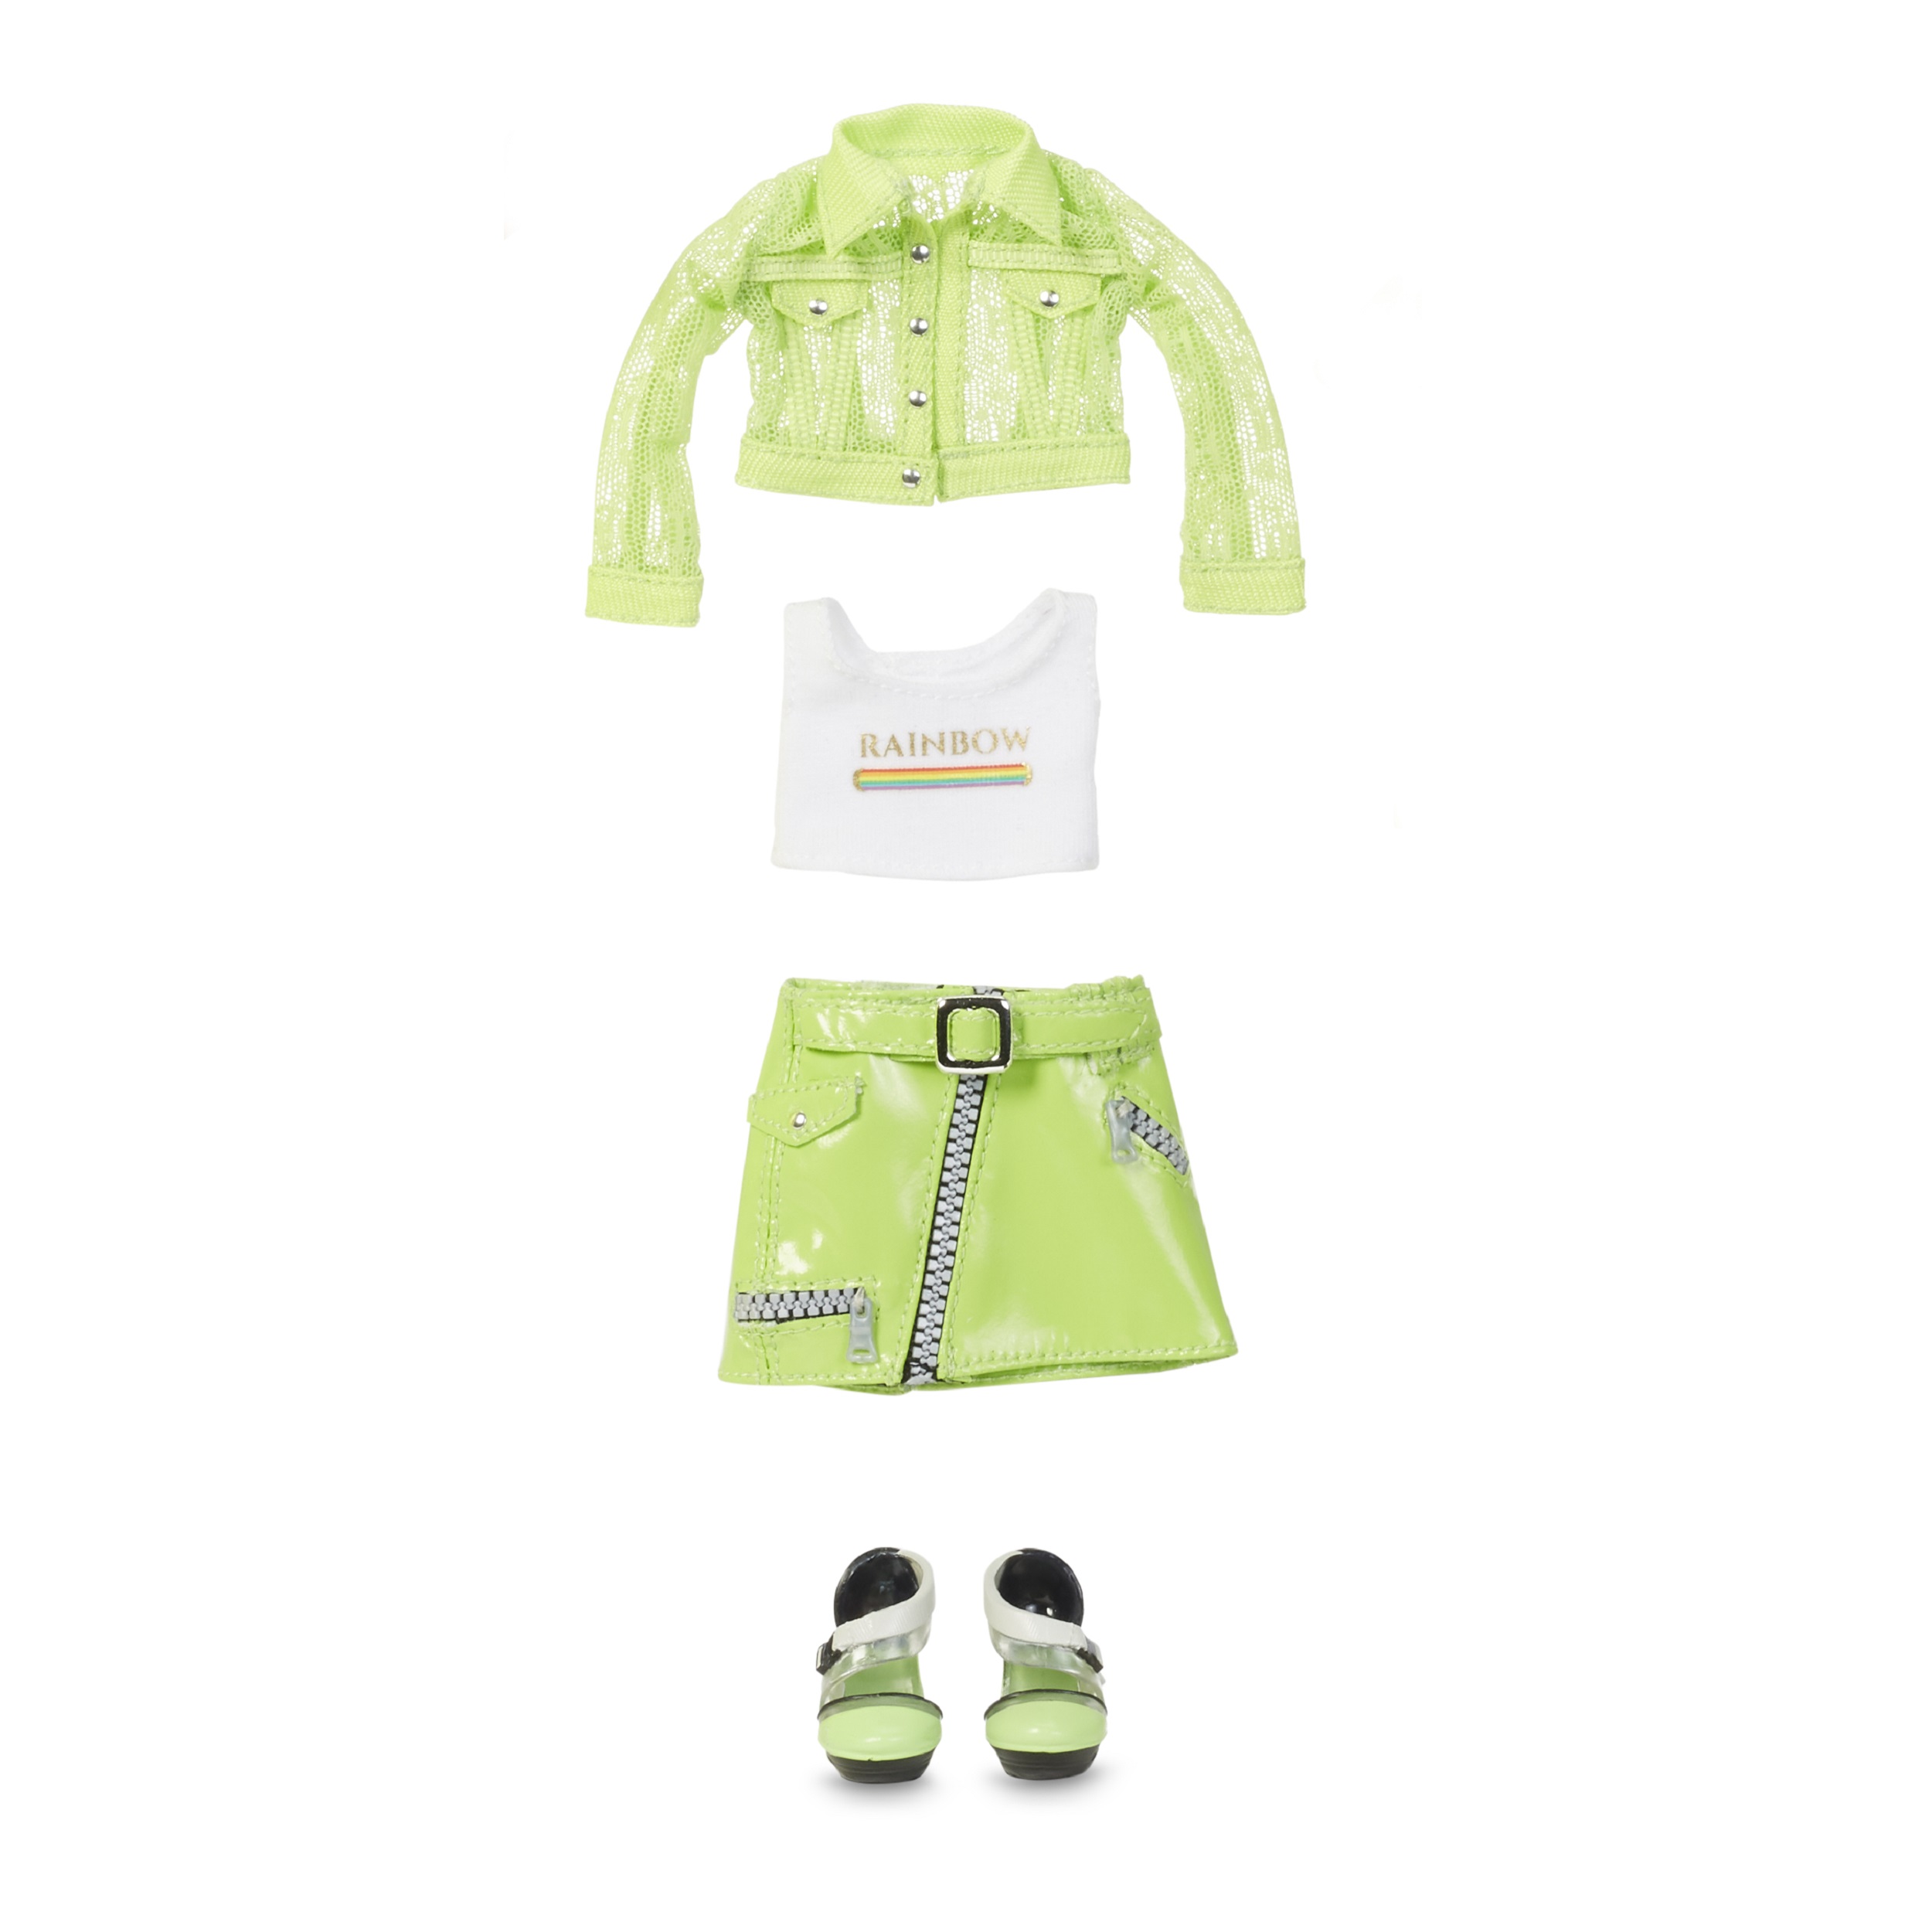 Rainbow High Karma Nichols – Neon Green Fashion Doll with 2 Complete Mix & Match Outfits and Accessories, Toys for Kids 6-12 Years Old - image 6 of 9